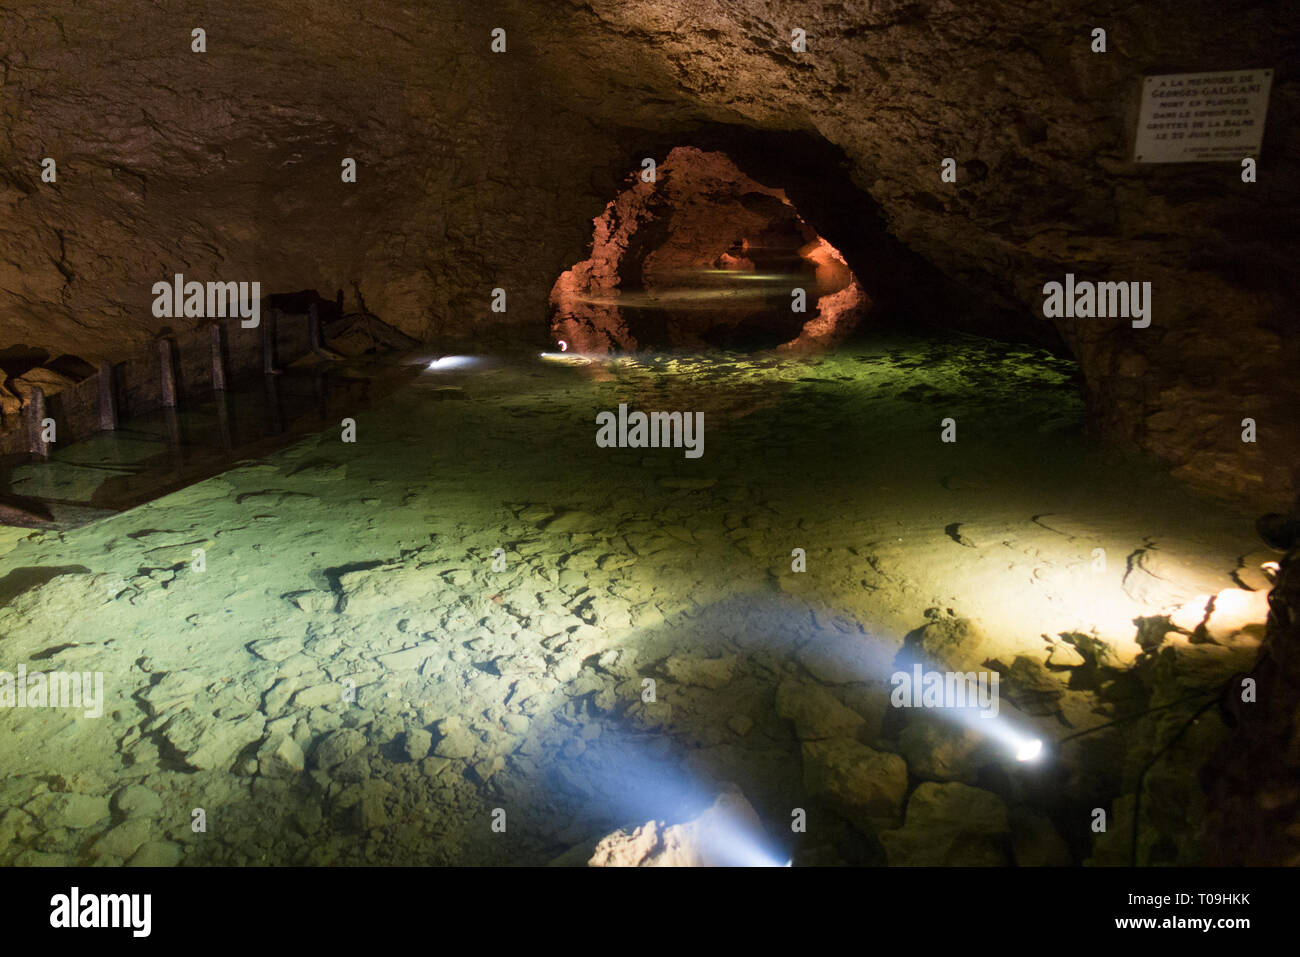 Water system with pool and pond & rock formation / arch / siphon; Caves of  La Balme ( Bat caves ), La Balme-les-Grottes, Isère department, France  Stock Photo - Alamy